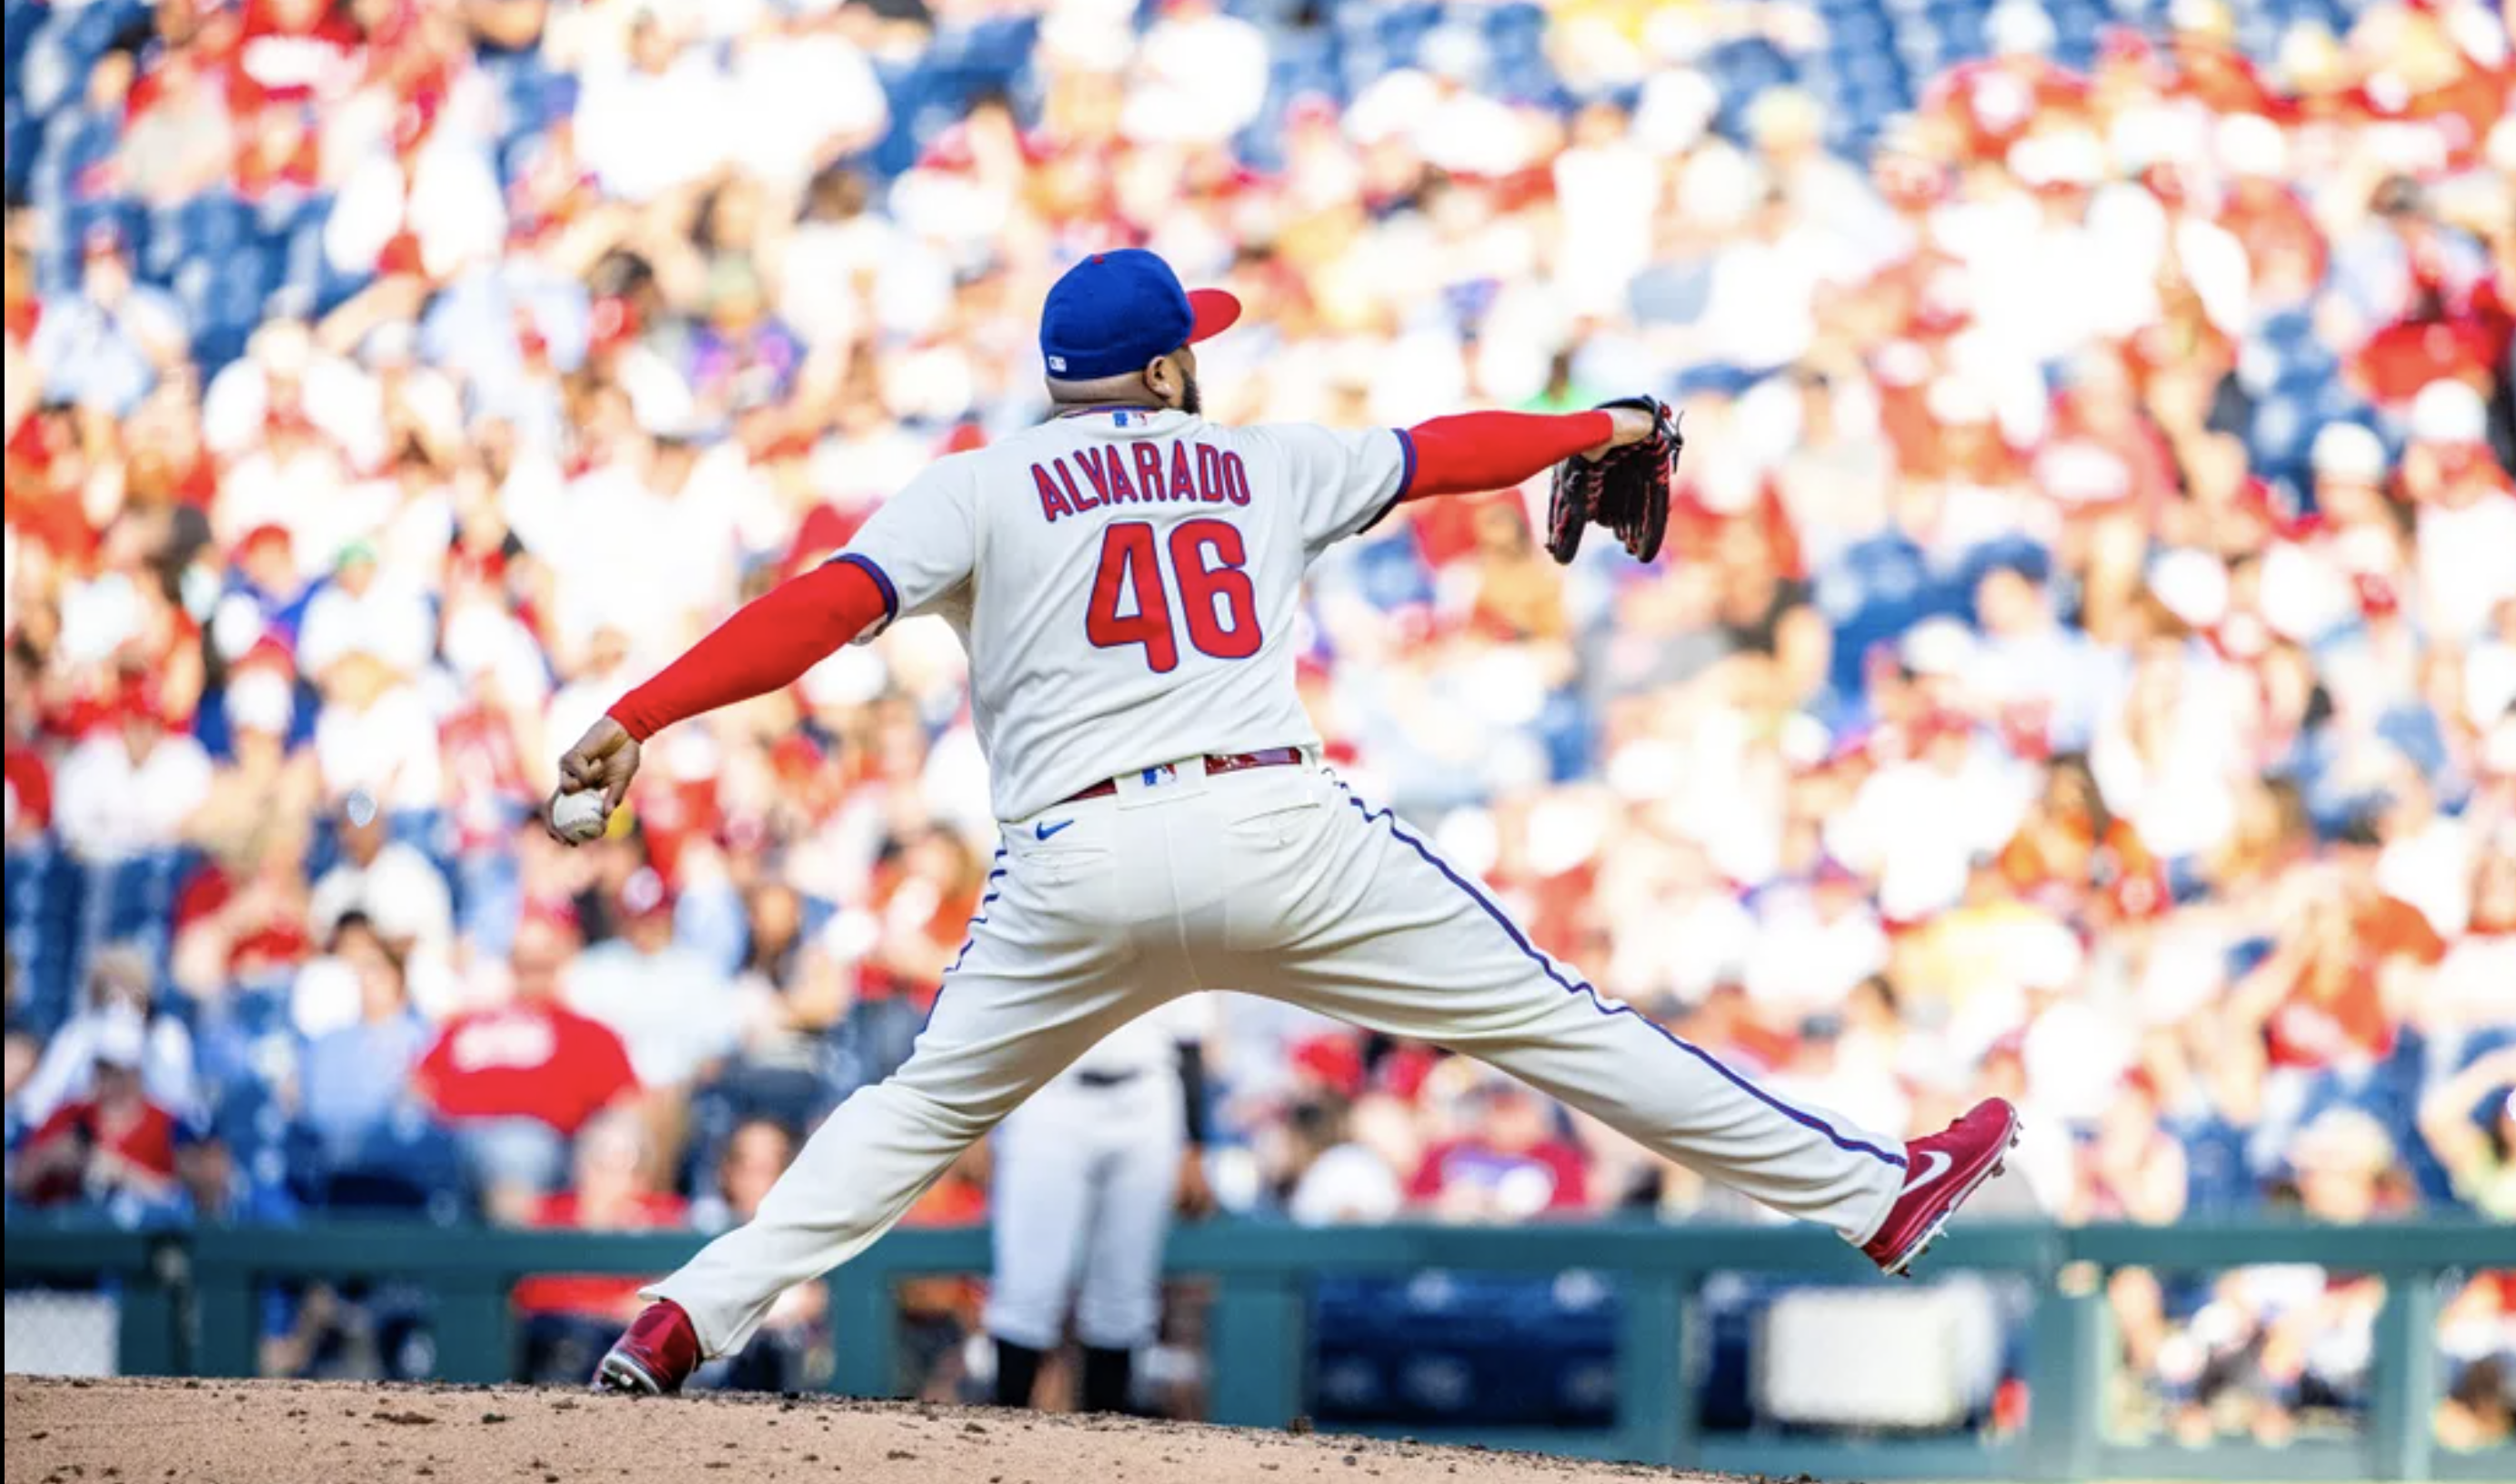 What happened to Jose Alvarado? Phillies pitcher placed on Injured